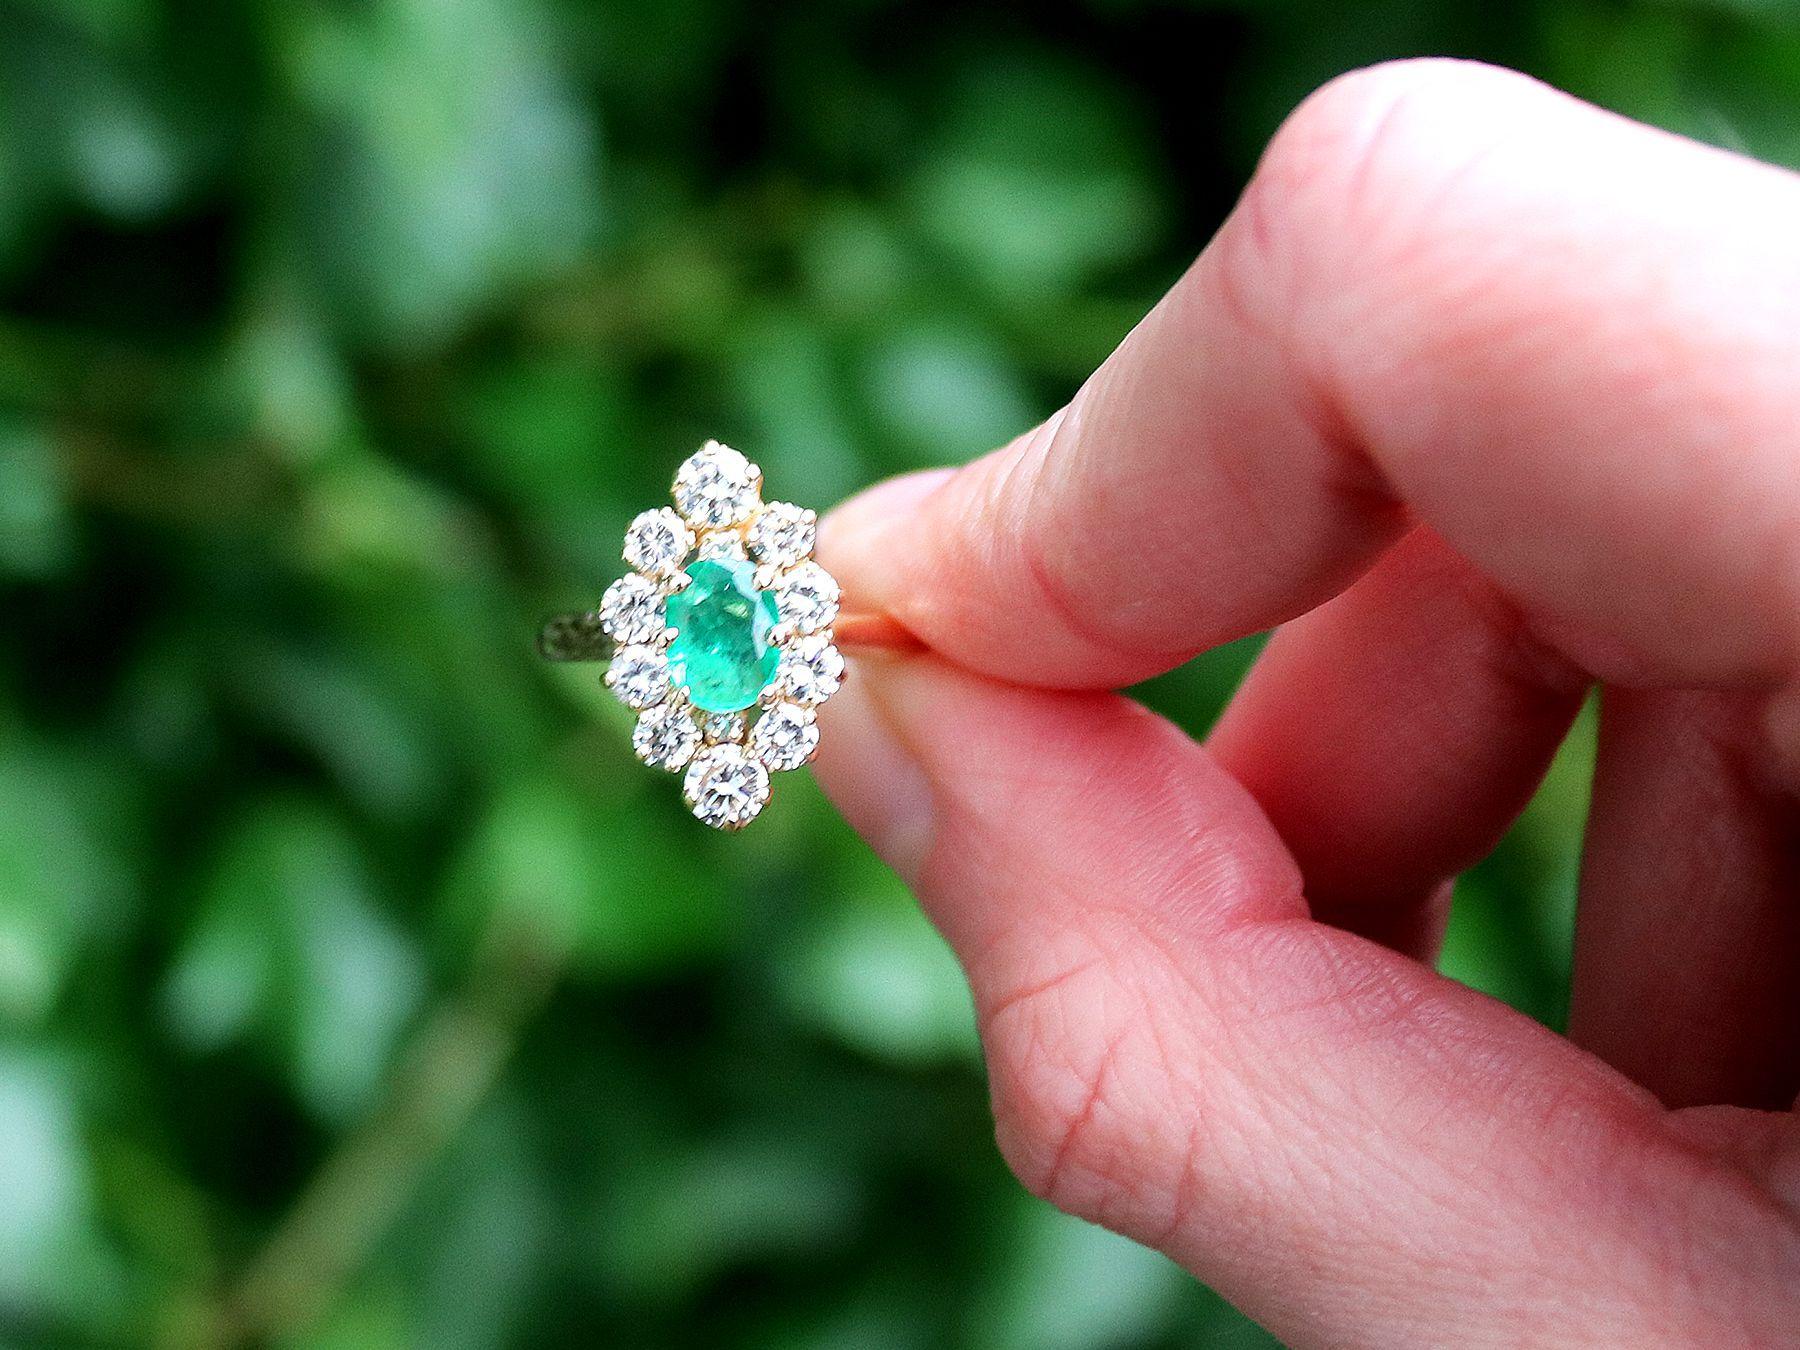 A fine and impressive 0.70 Carat emerald and 0.98 Carat diamond, 18 karat yellow gold dress ring; part of our diverse vintage jewelry and estate jewelry collections.

This fine and impressive vintage emerald and diamond cluster ring has been crafted